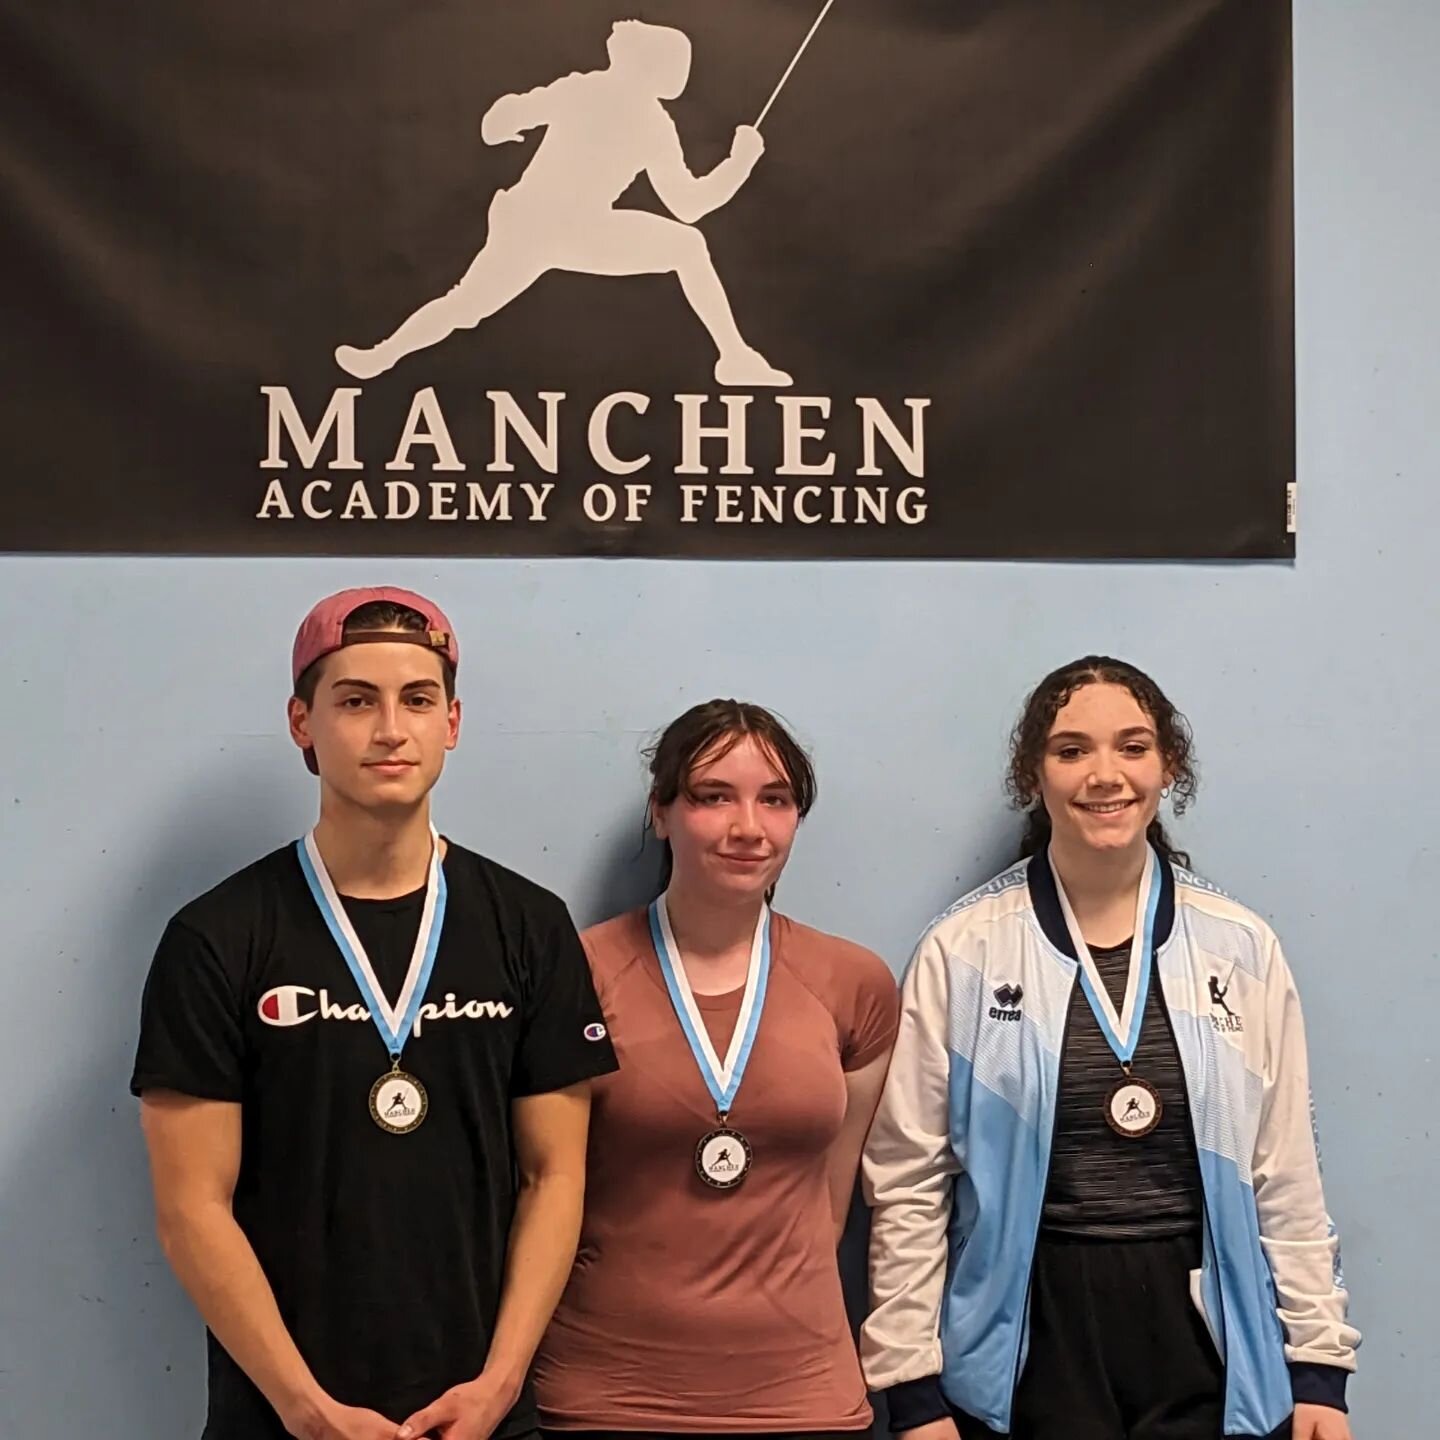 Great night of fencing yesterday with our E &amp; Under Foil!  Congrats to our medalists:

🥇 Ryan McLaughlin @stevensfencing - earned &quot;D&quot;!
🥈 Zoe Lenz @fencersclub 
🥉 Julia DiPaolo (MAF)
🥉 Sam Belokon @freeholdfencing